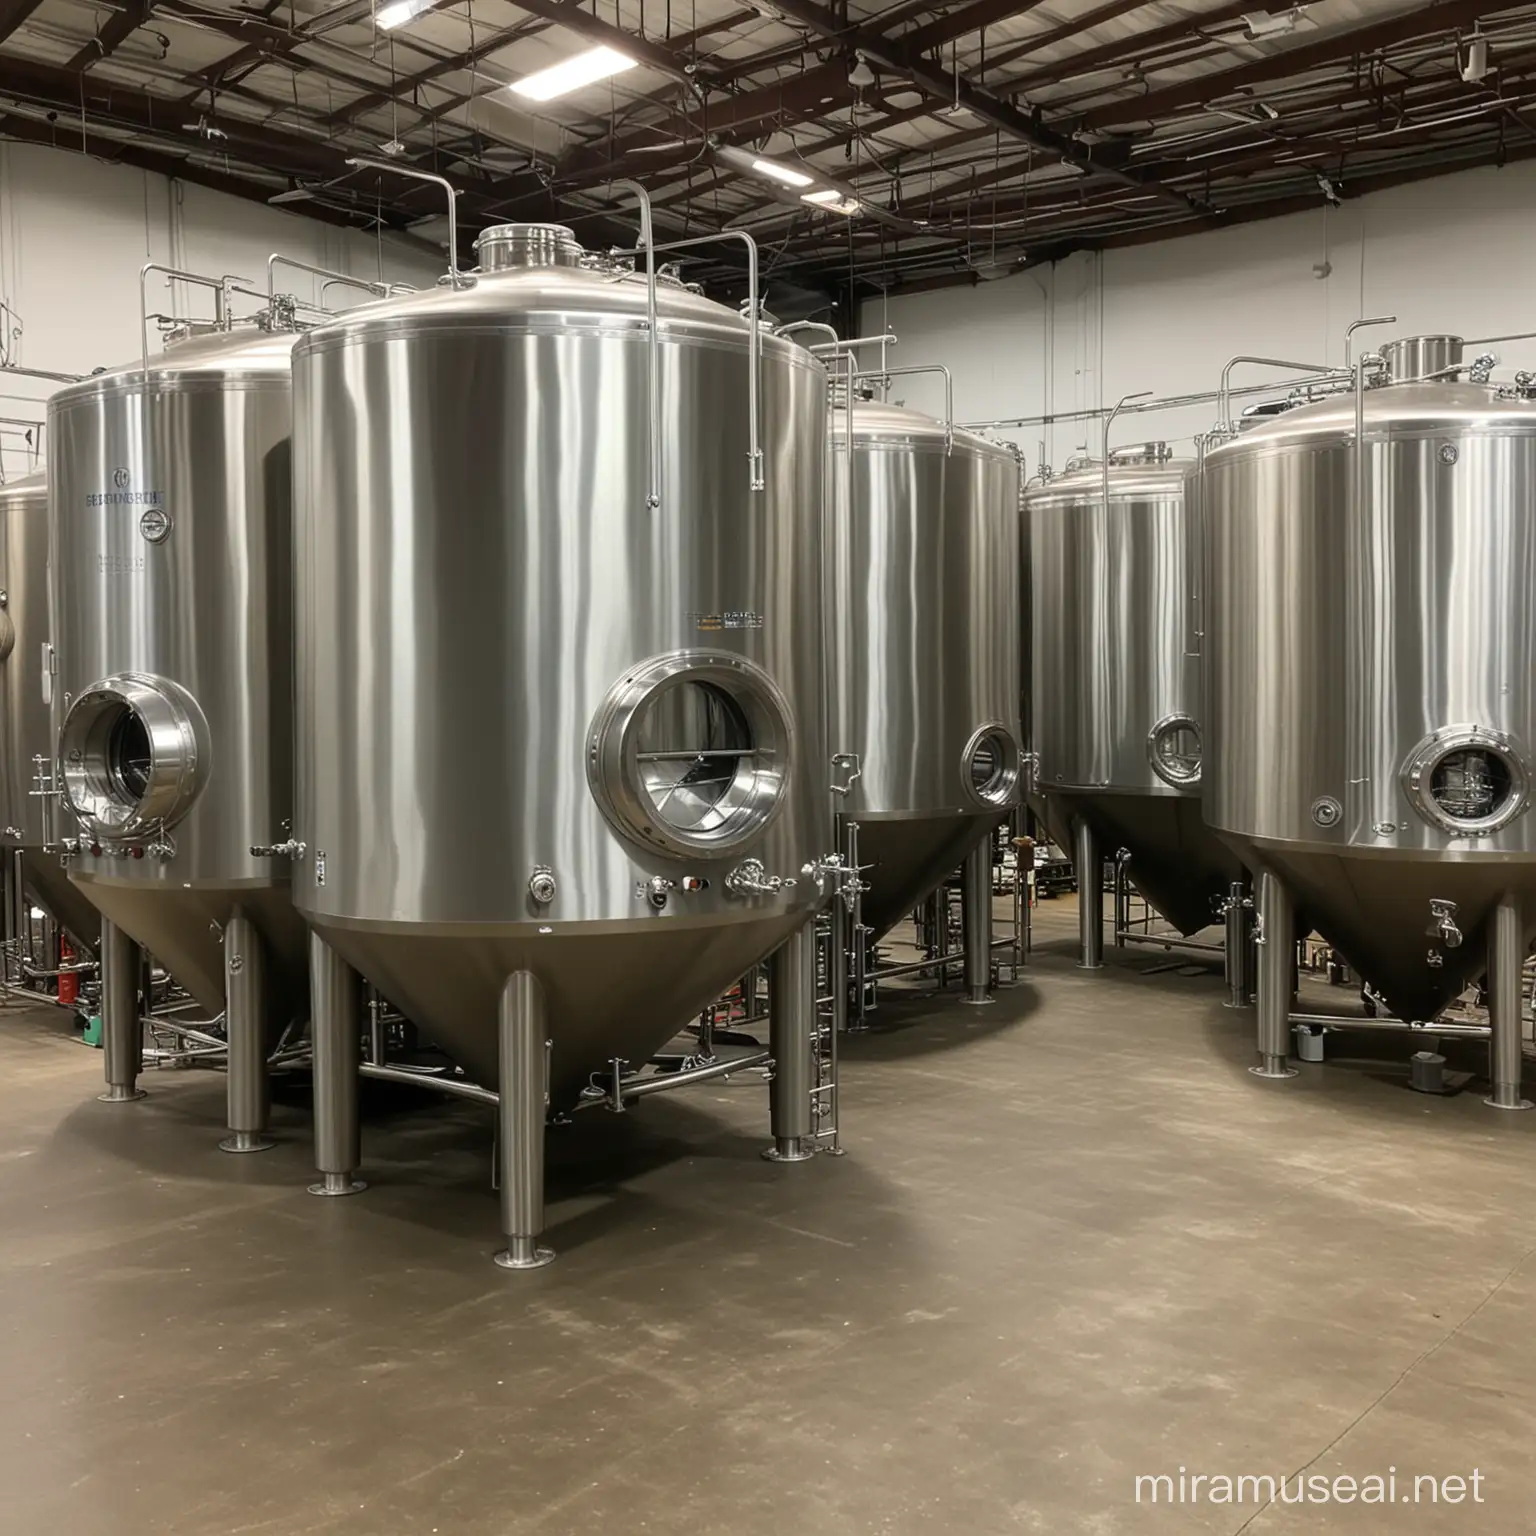 Craft Brewery Tank in Industrial Setting with Fermentation Process